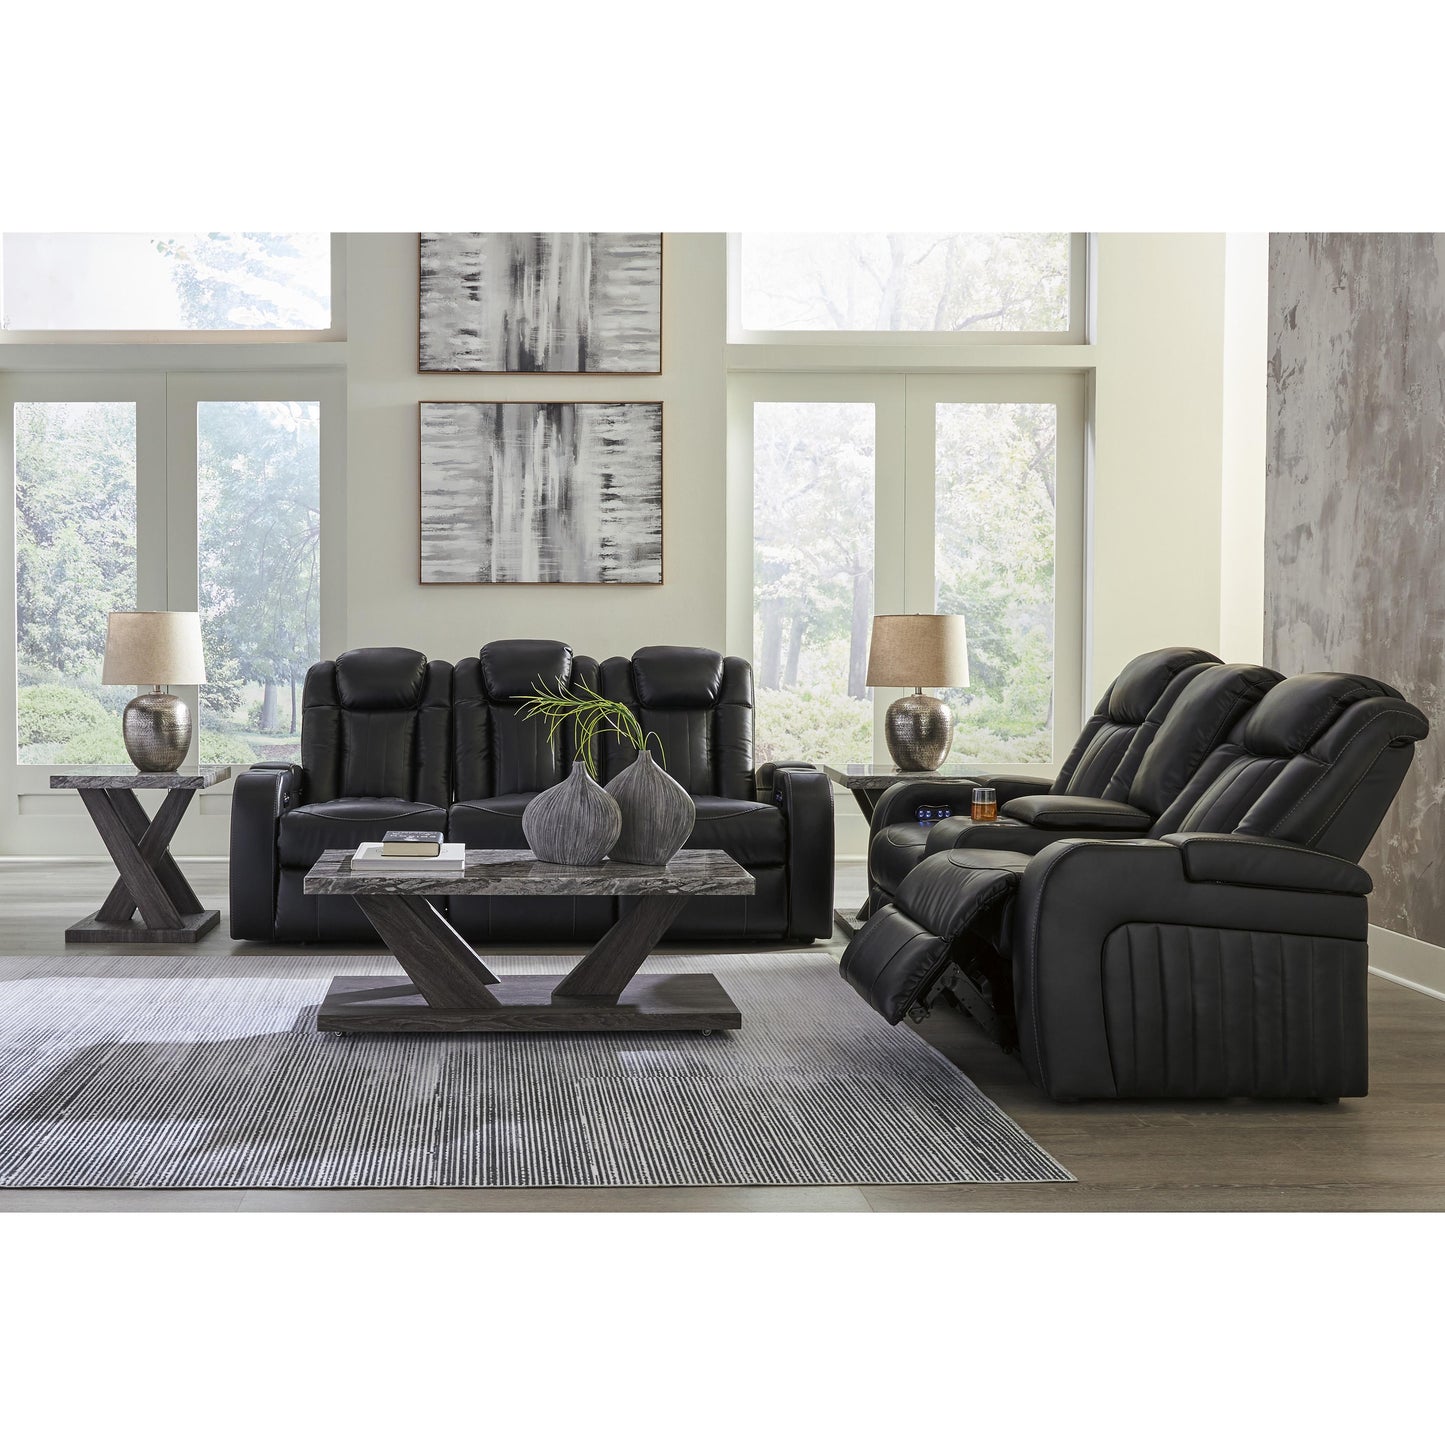 Signature Design by Ashley Caveman Den Power Reclining Leather Look Loveseat 9070318 IMAGE 13